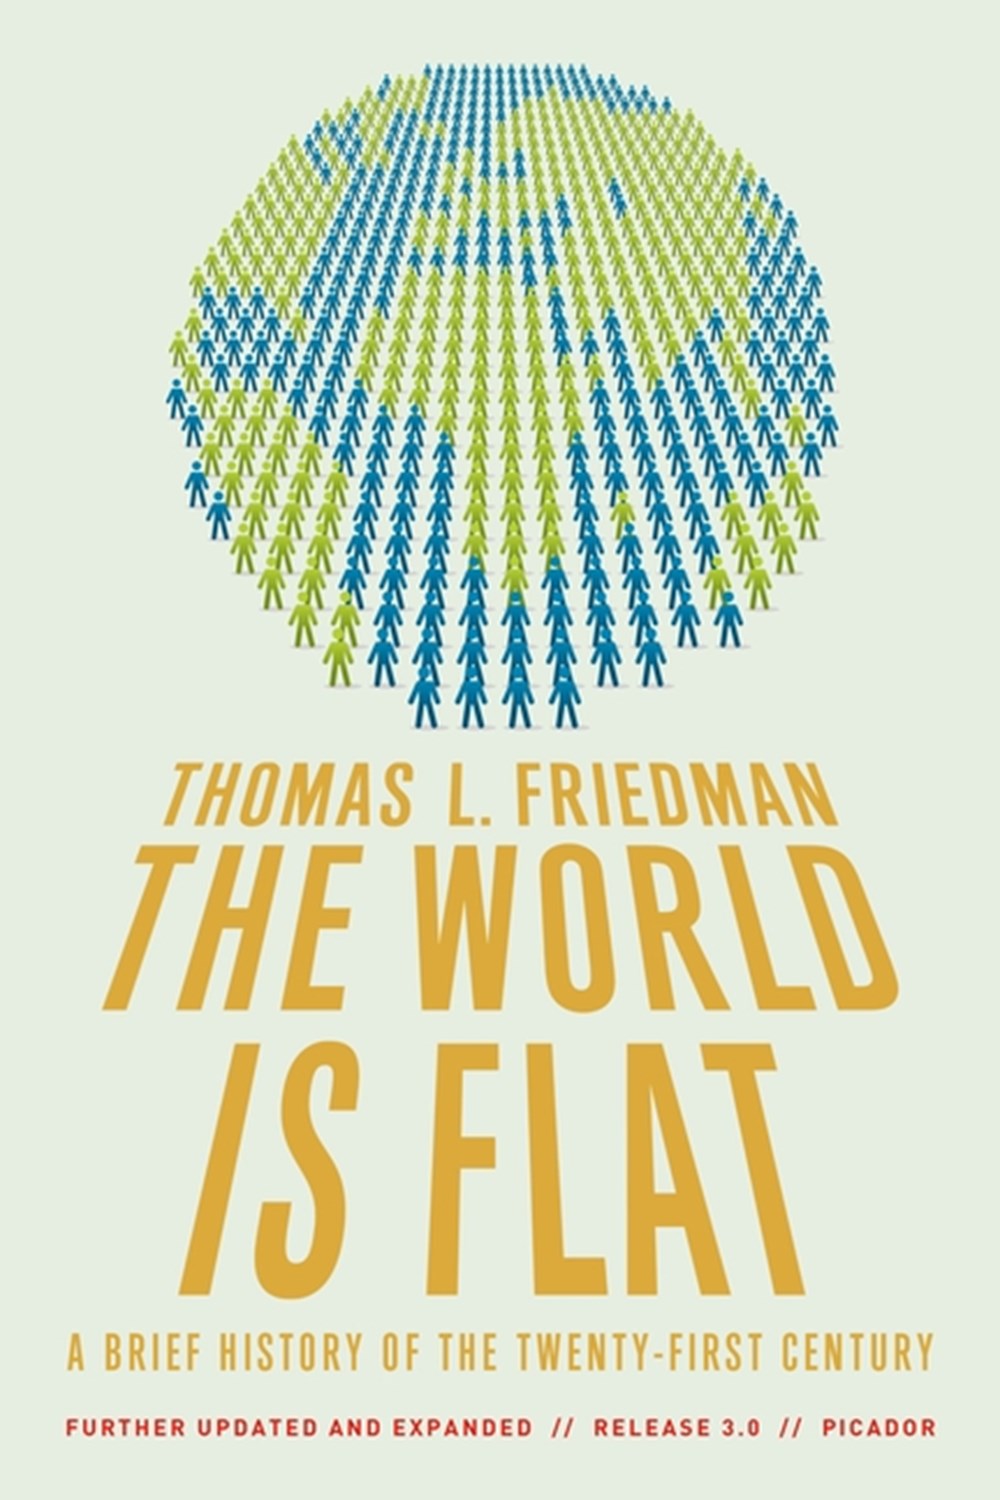 World Is Flat 3.0: A Brief History of the Twenty-First Century (Further Updated and Expanded)